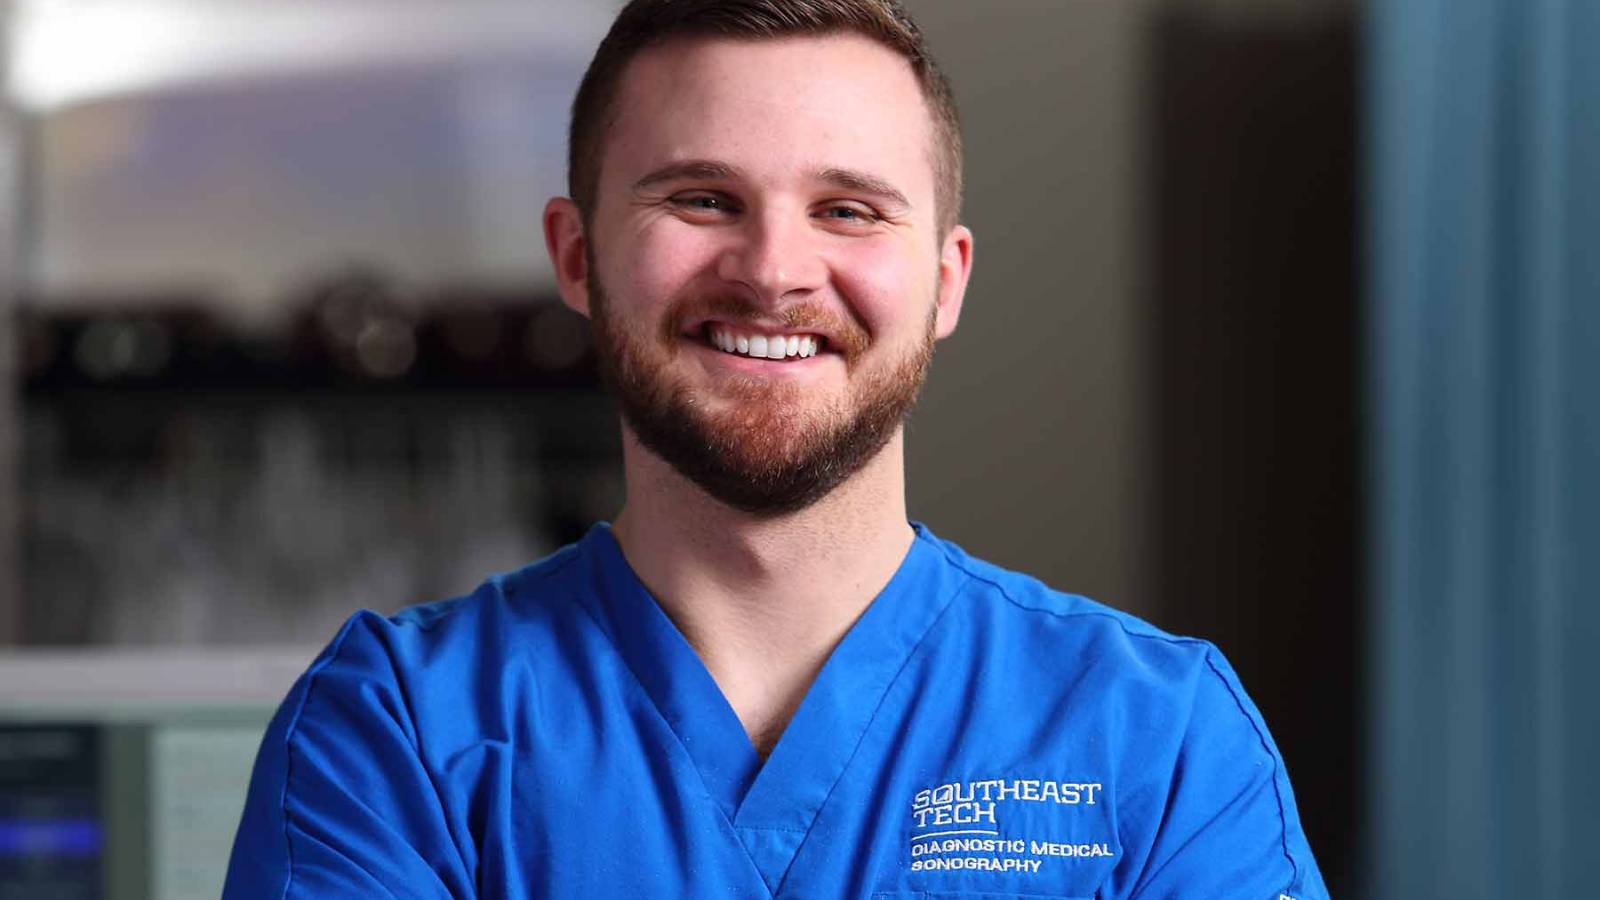 Male sonography student wearing blue scubs in exam room, smiling